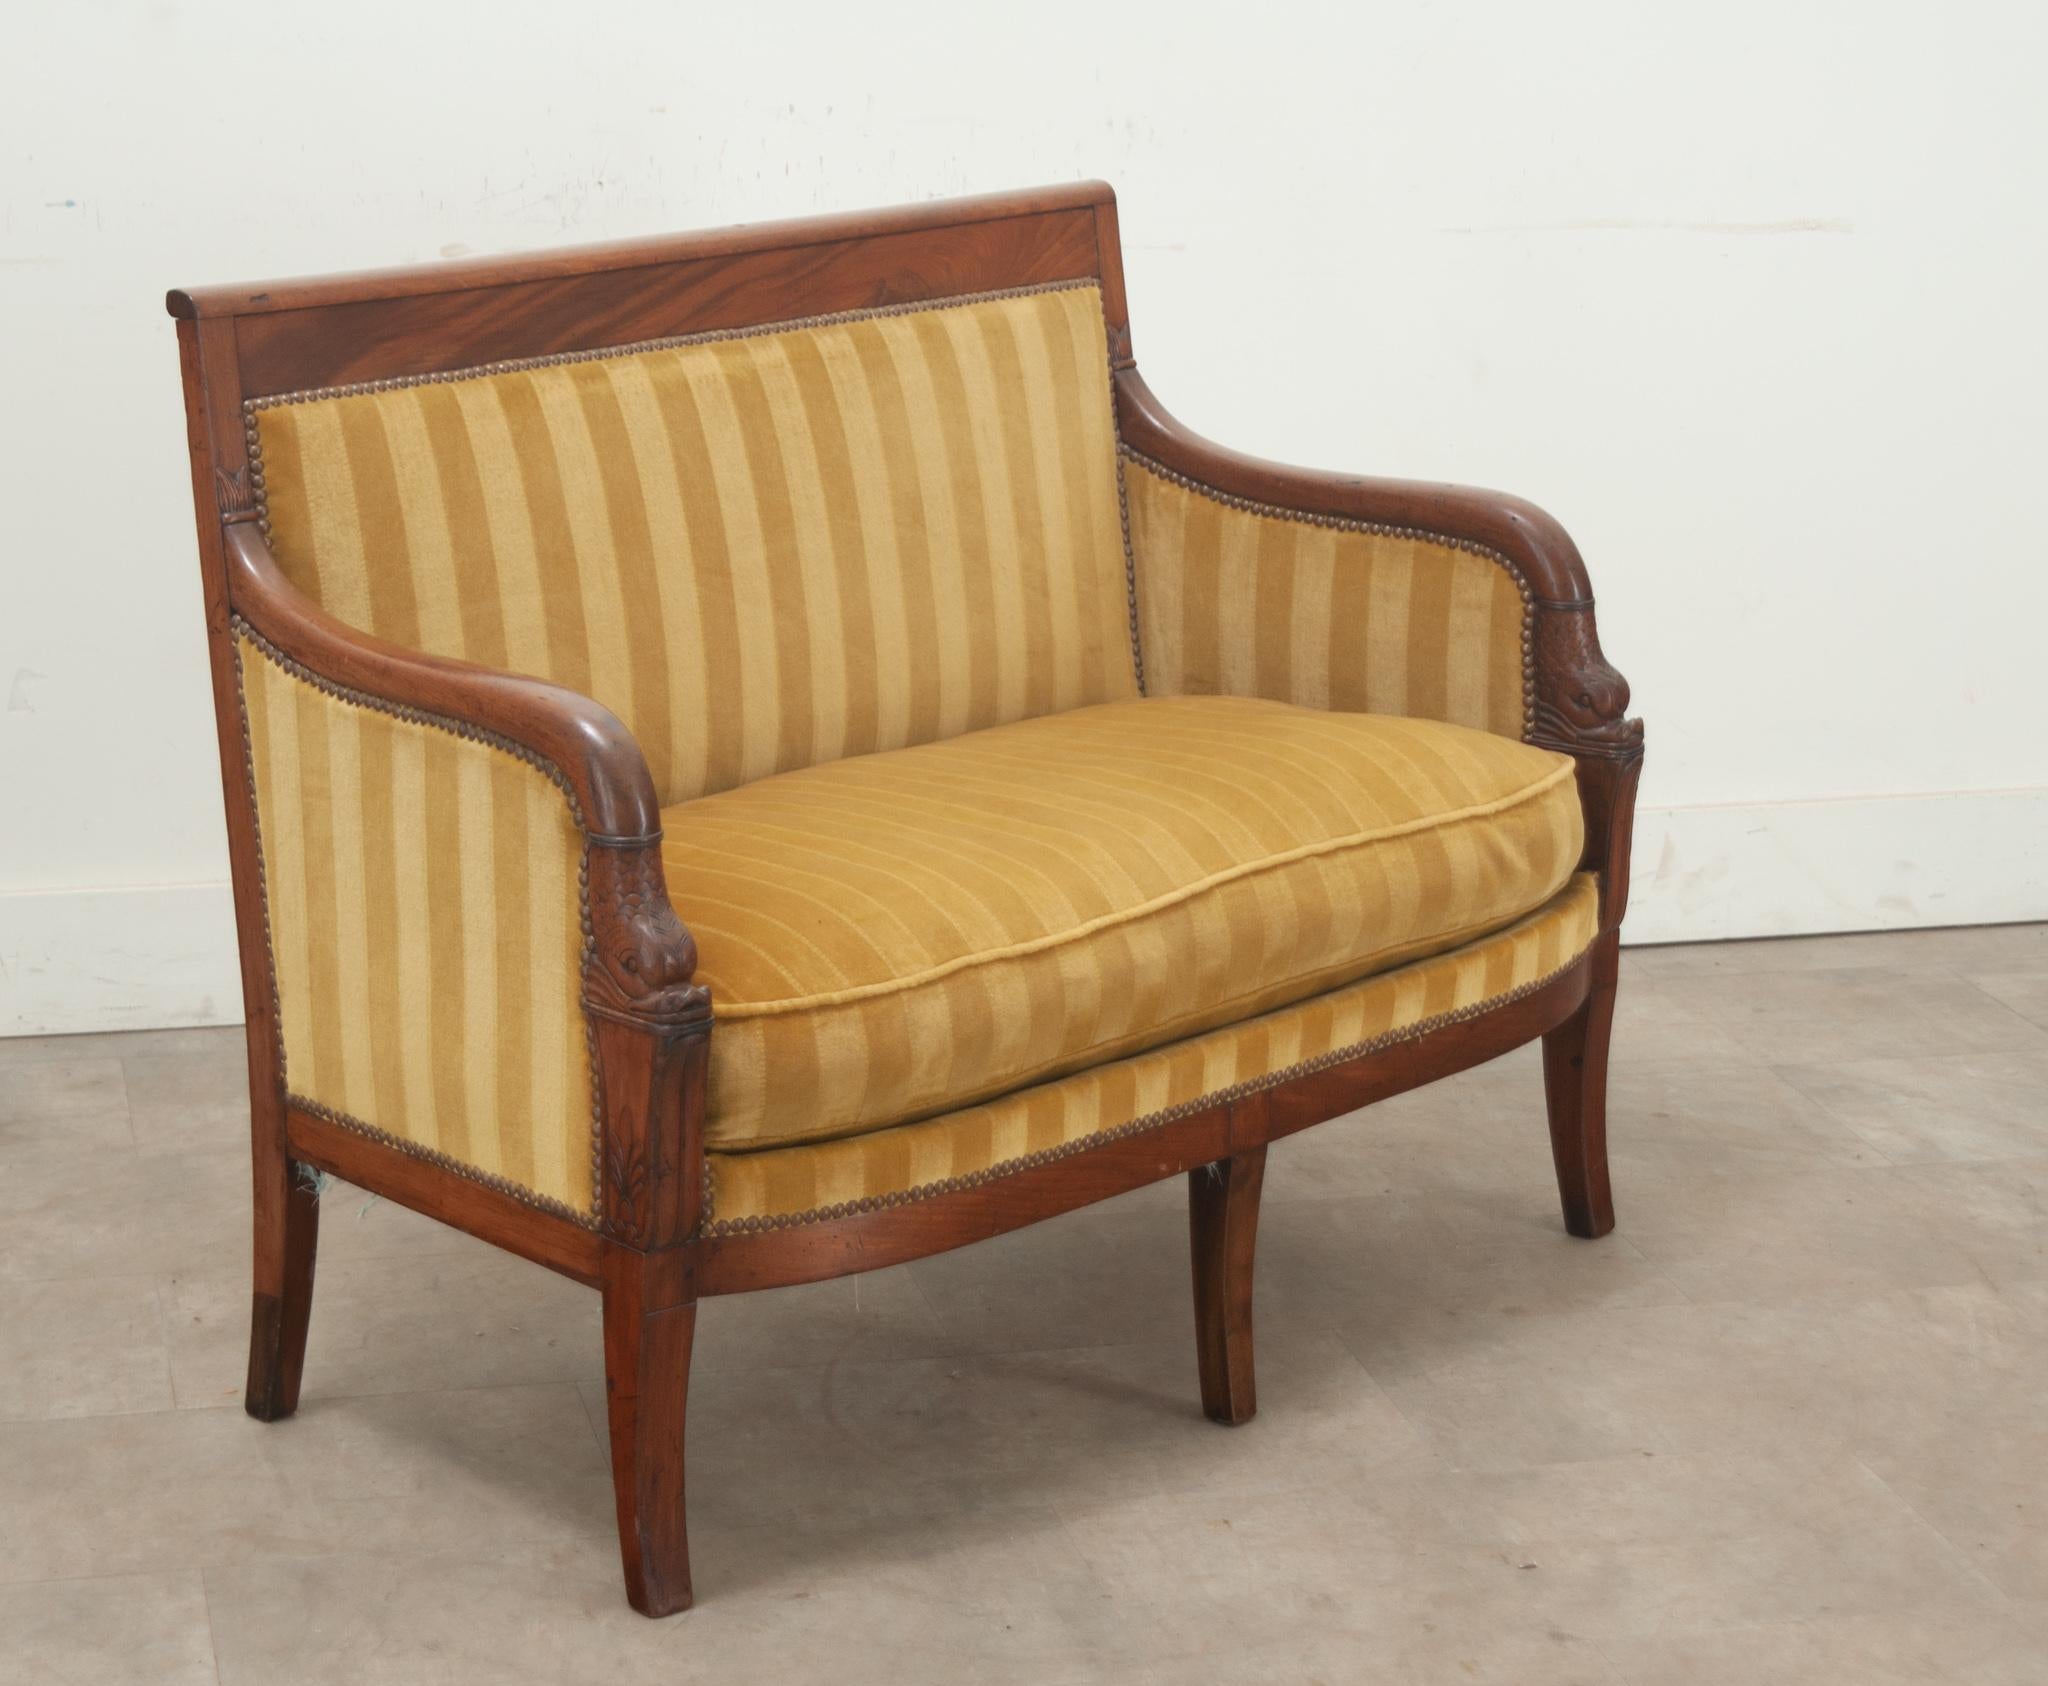 A petite carved Restauration period settee made in France. This comfortable settee has a decoratively carved mahogany frame with classic motifs along the arms. The frame is upholstered in a gently used canary yellow stripe upholstery with a brass